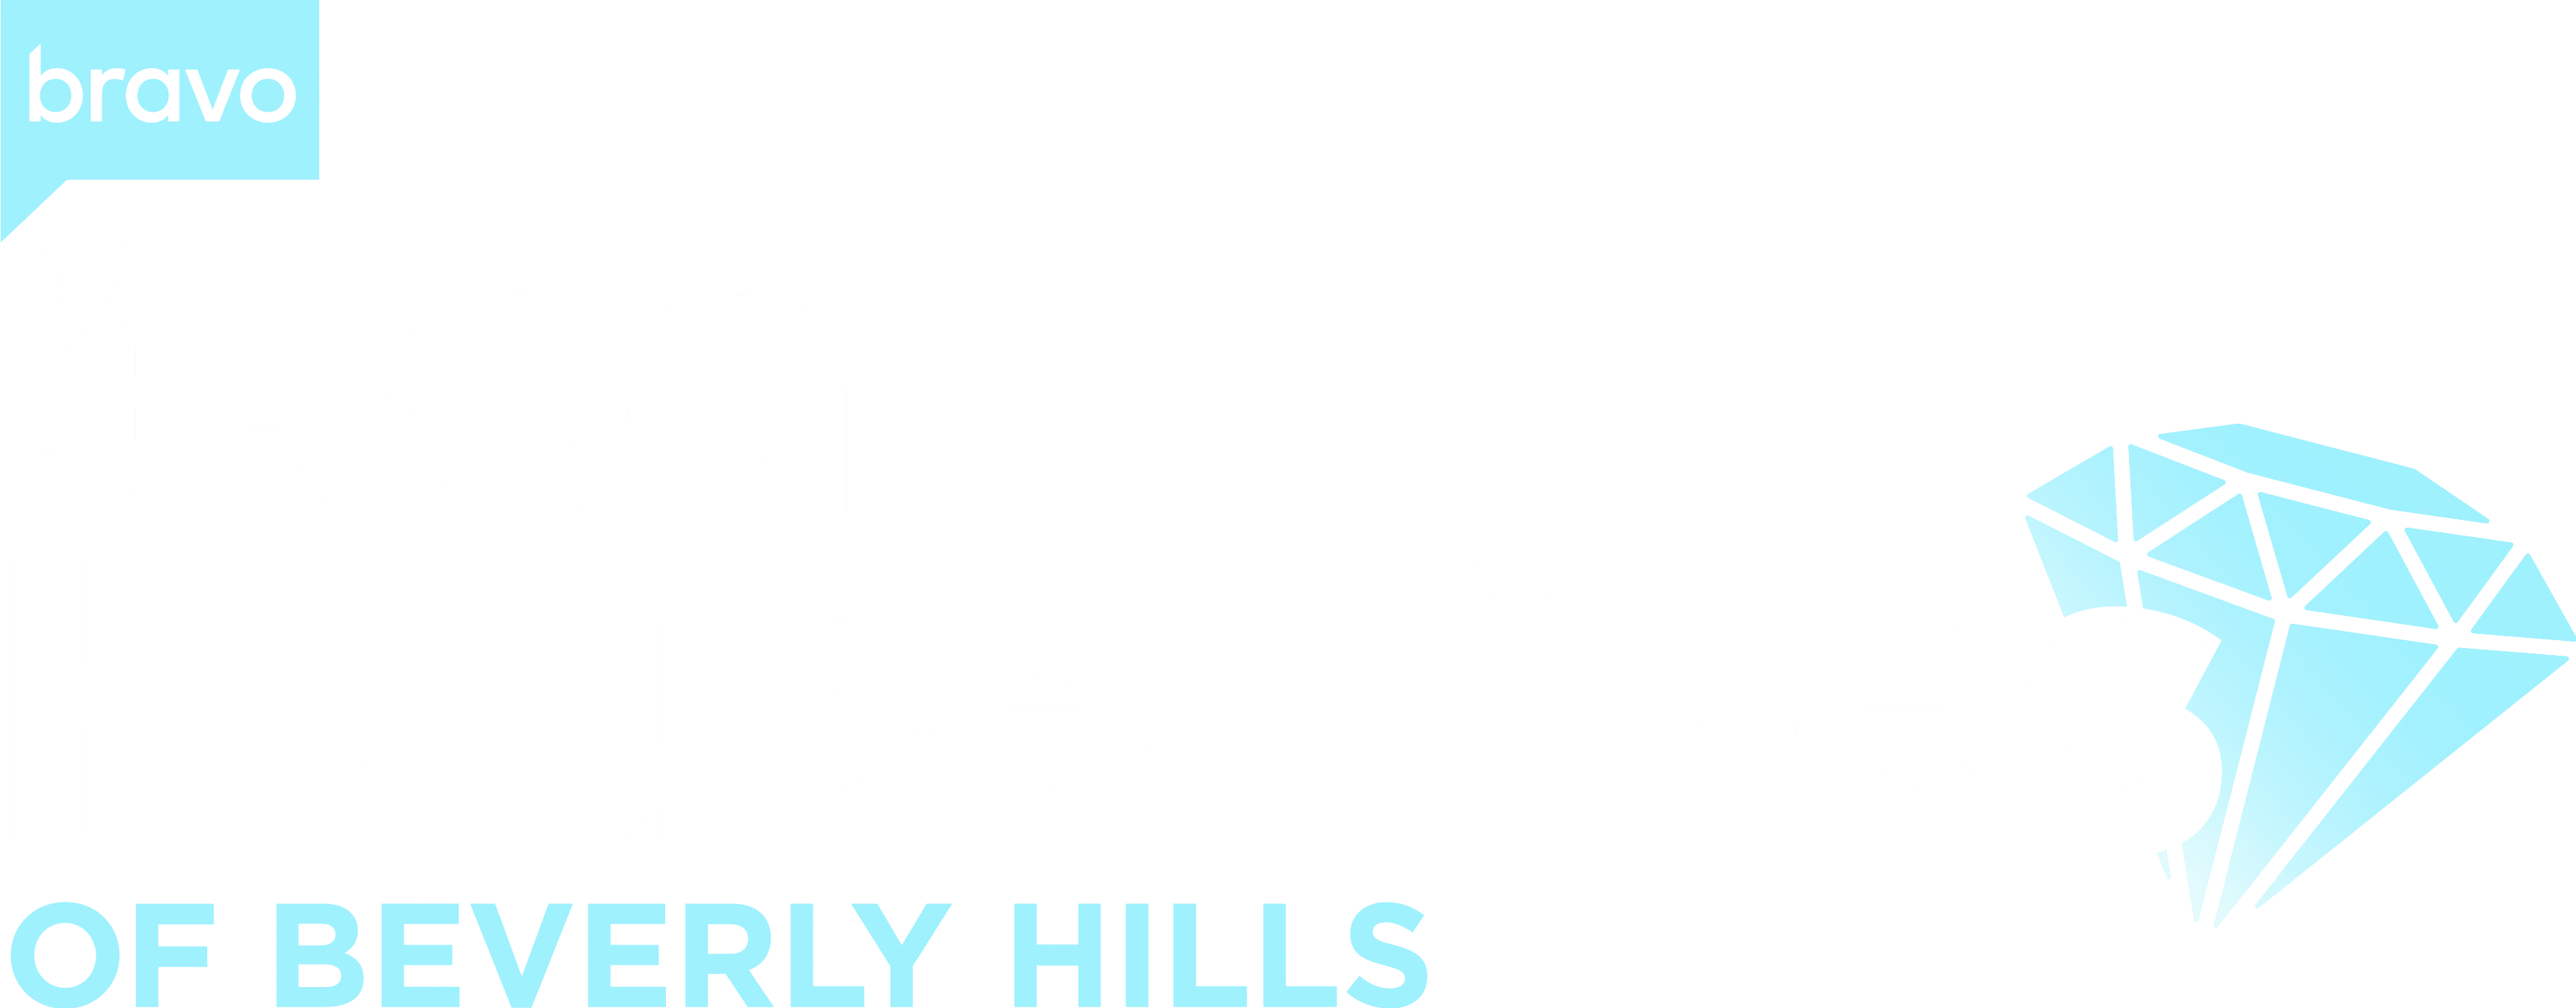 The Real Housewives of Beverly Hills logo